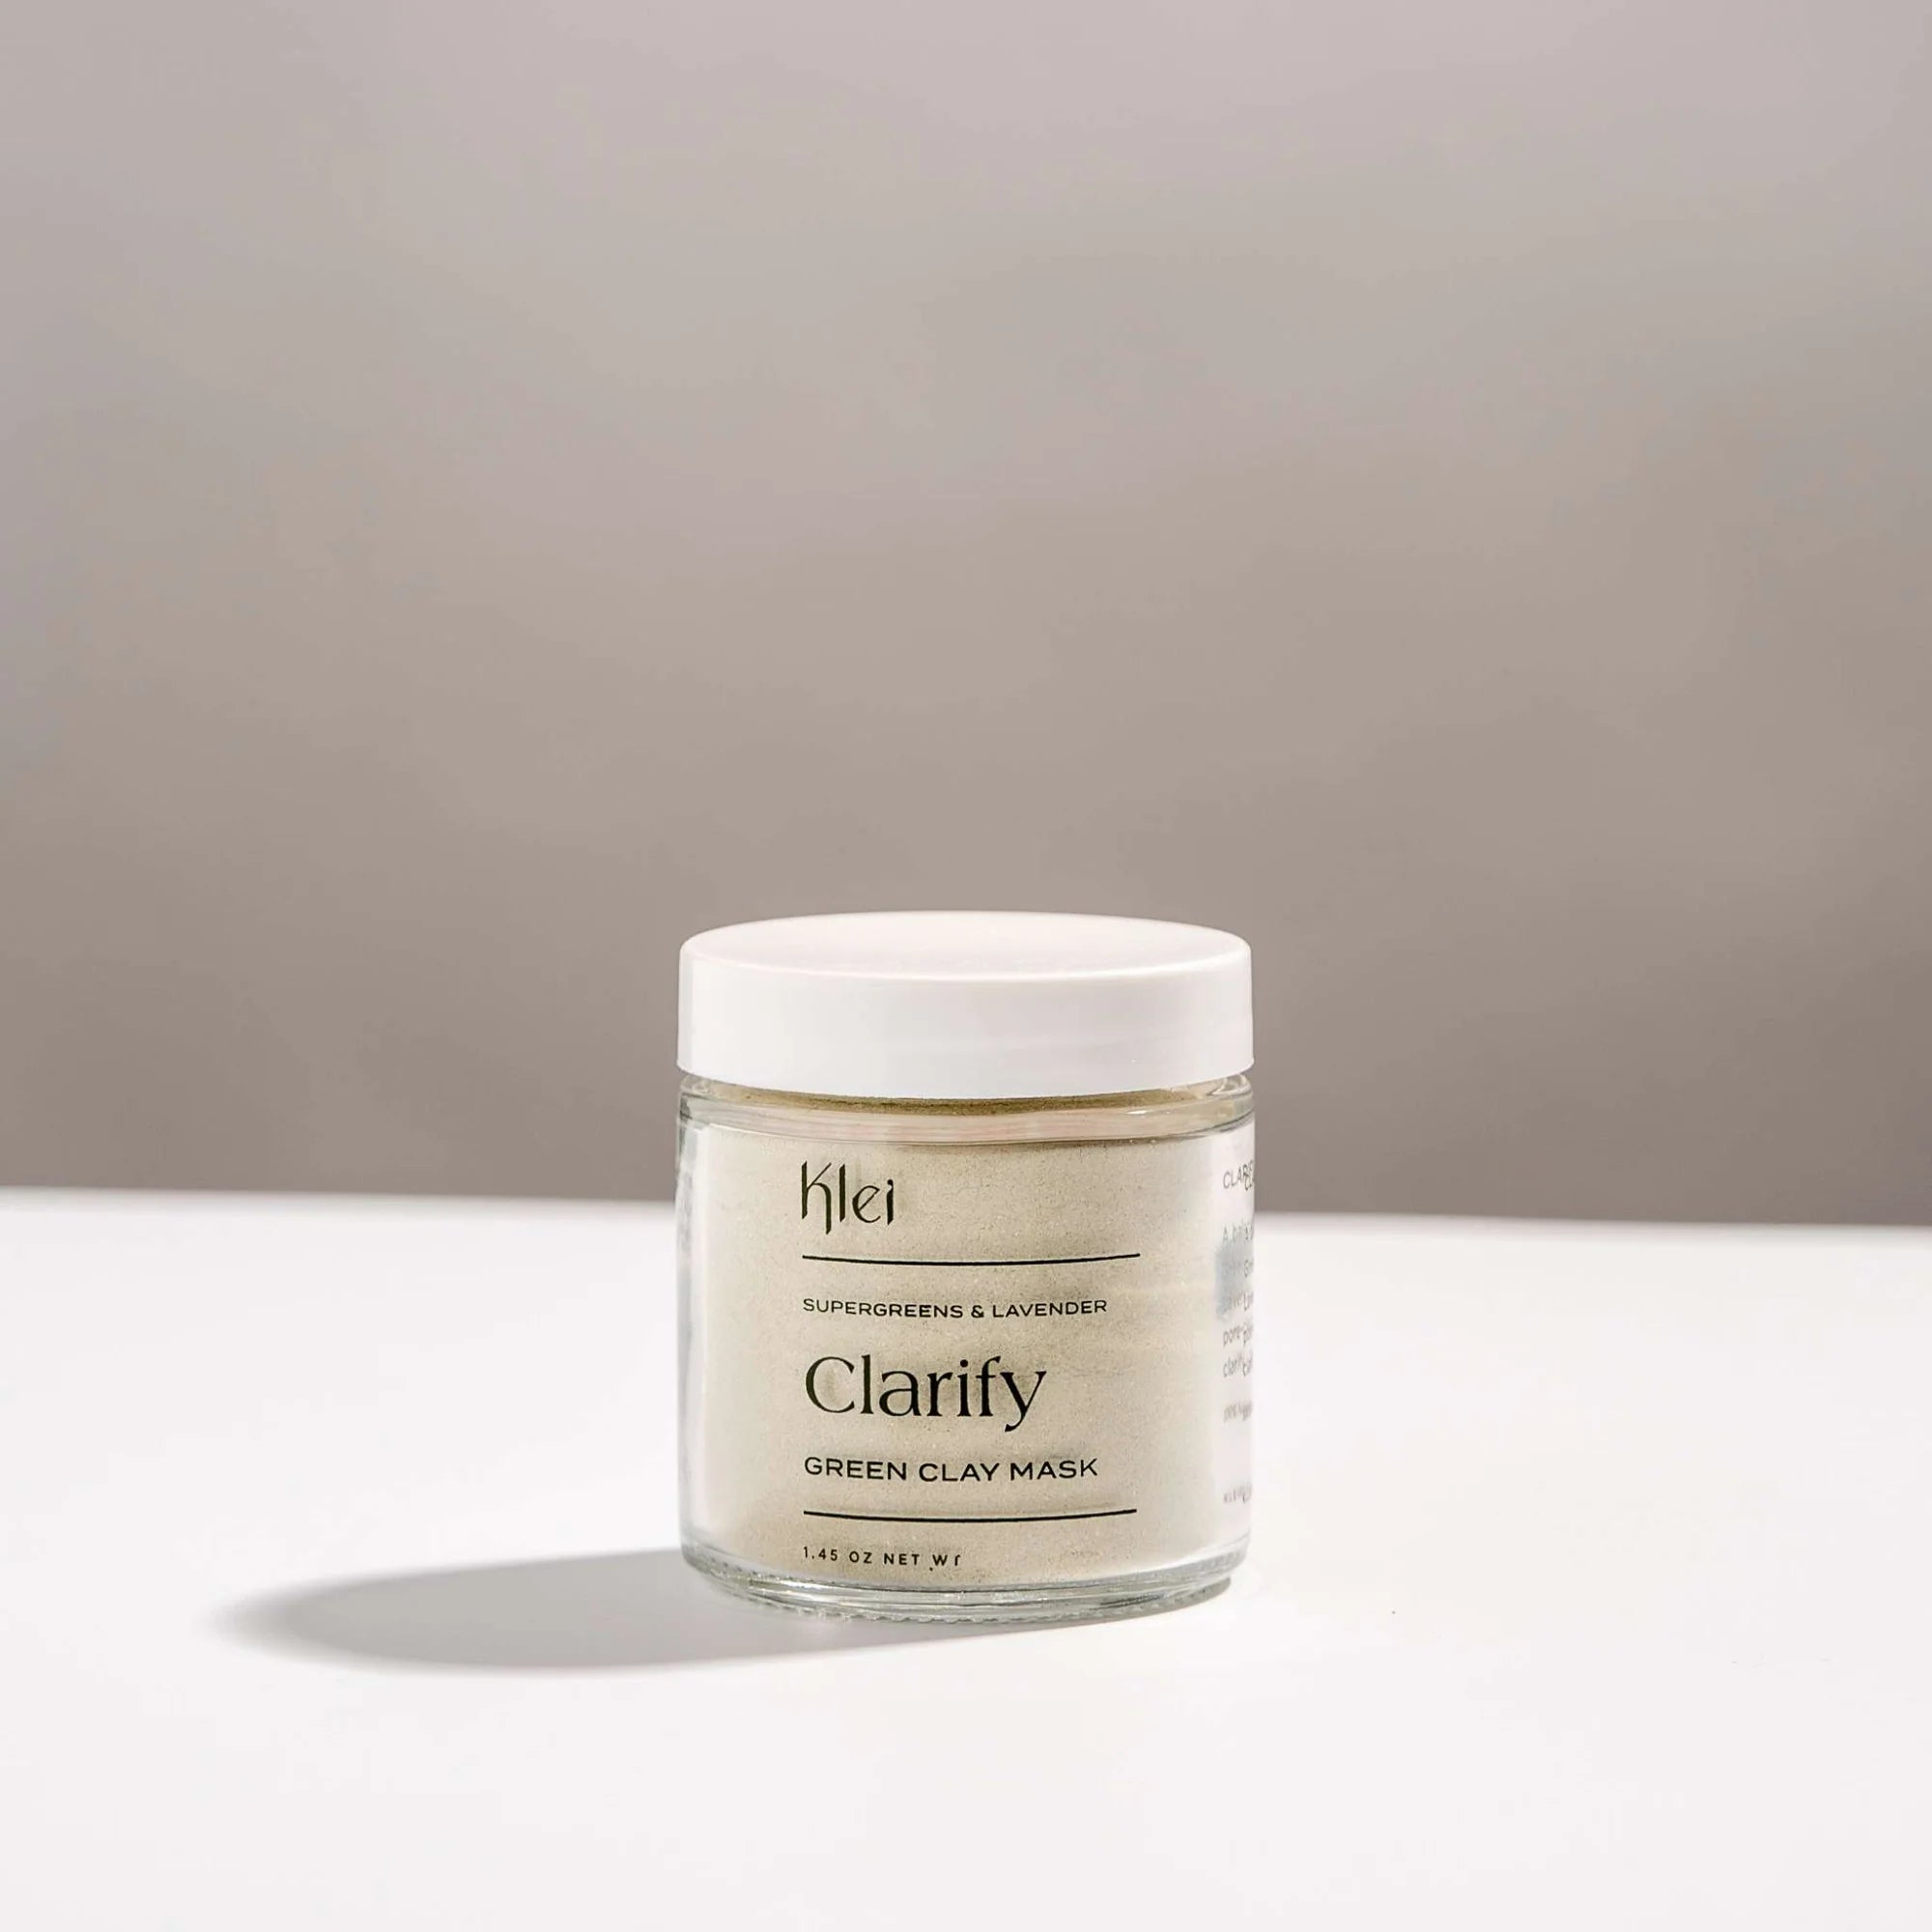 Clarify SuperGreens & Lavender Green Clay Mask Beauty Klei 